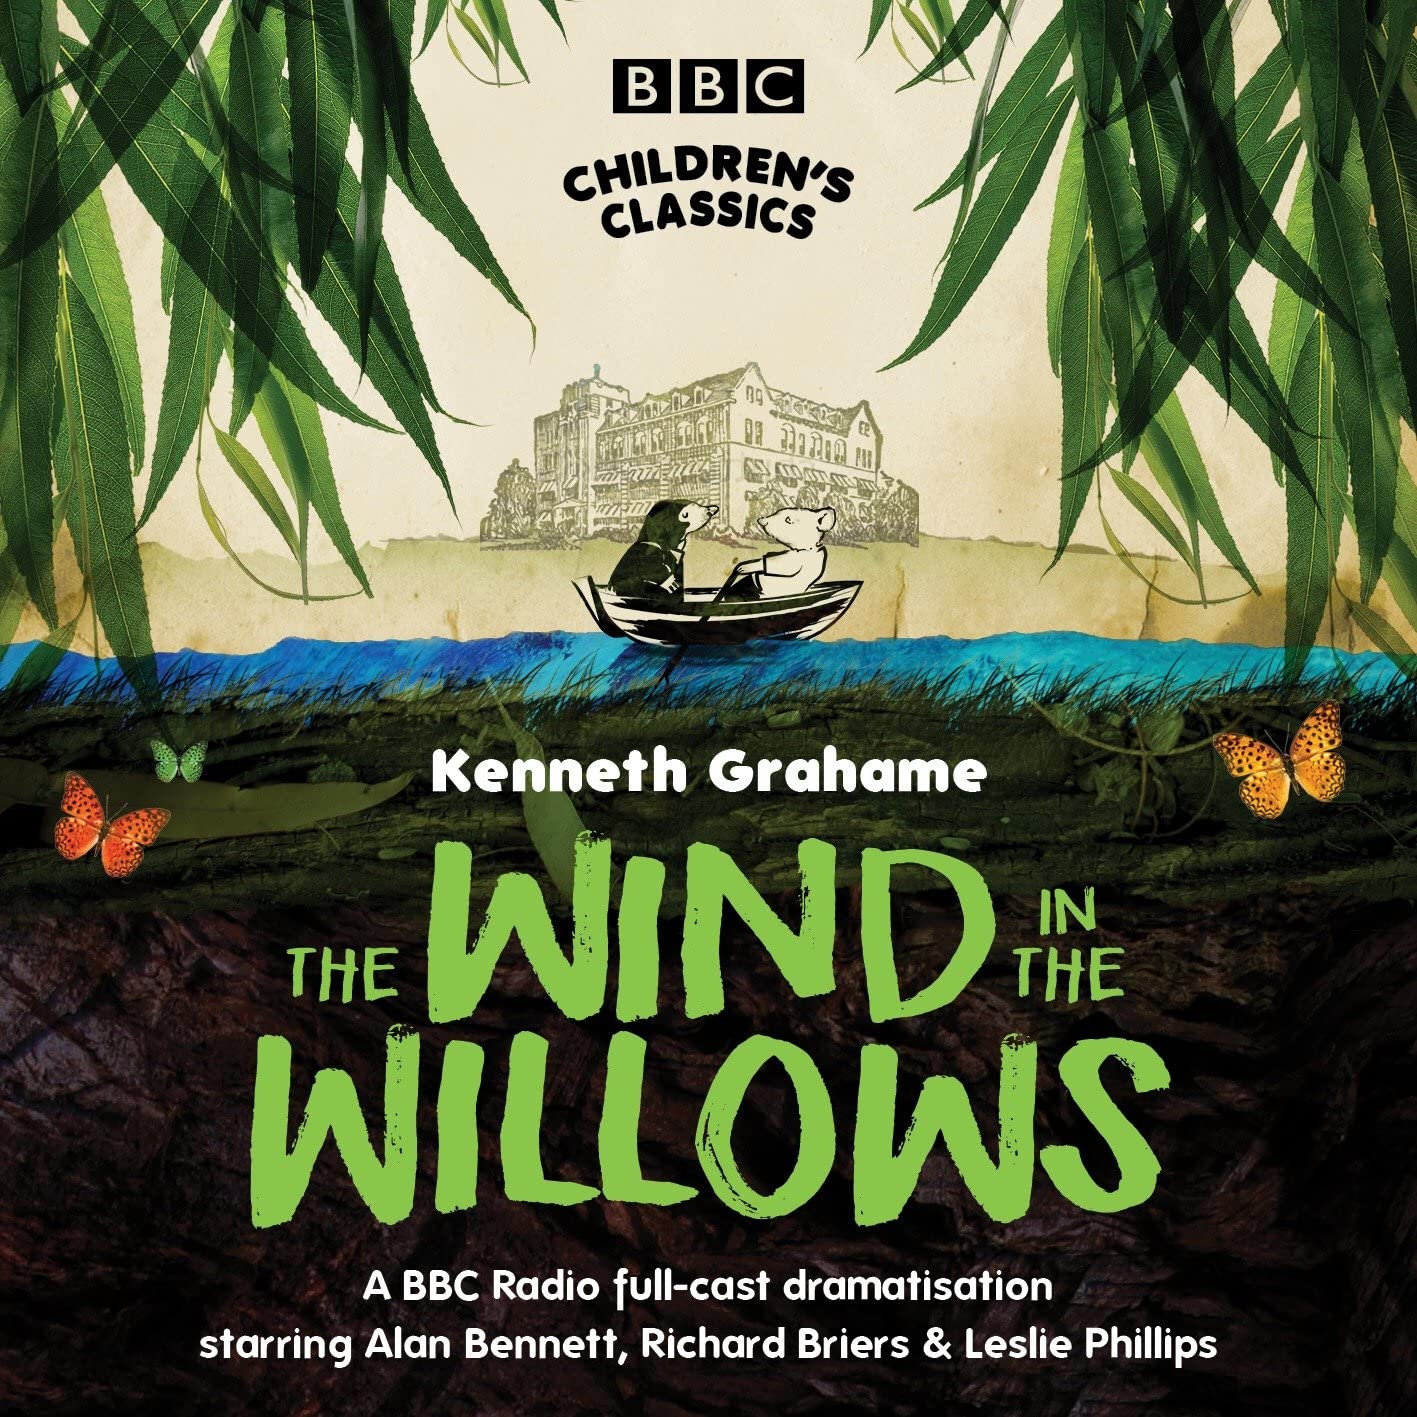 The Wind In The Willows (BBC Childrens Classics)